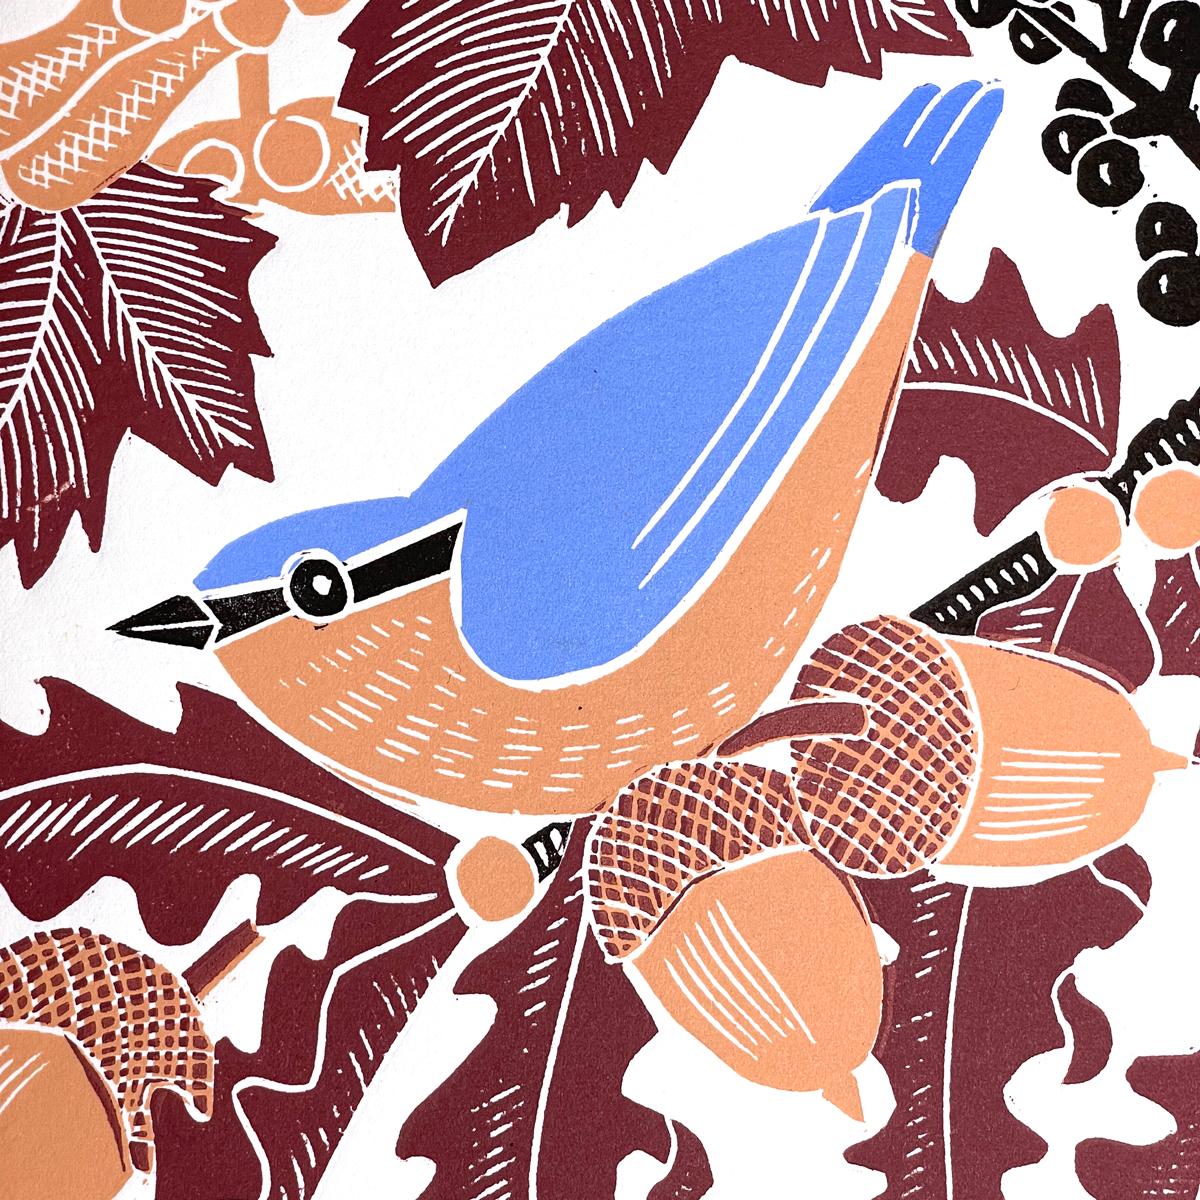 Nuthatch, bird art, leaf art, limited edition print, affordable art, nature art - Contemporary Print by Kate Heiss